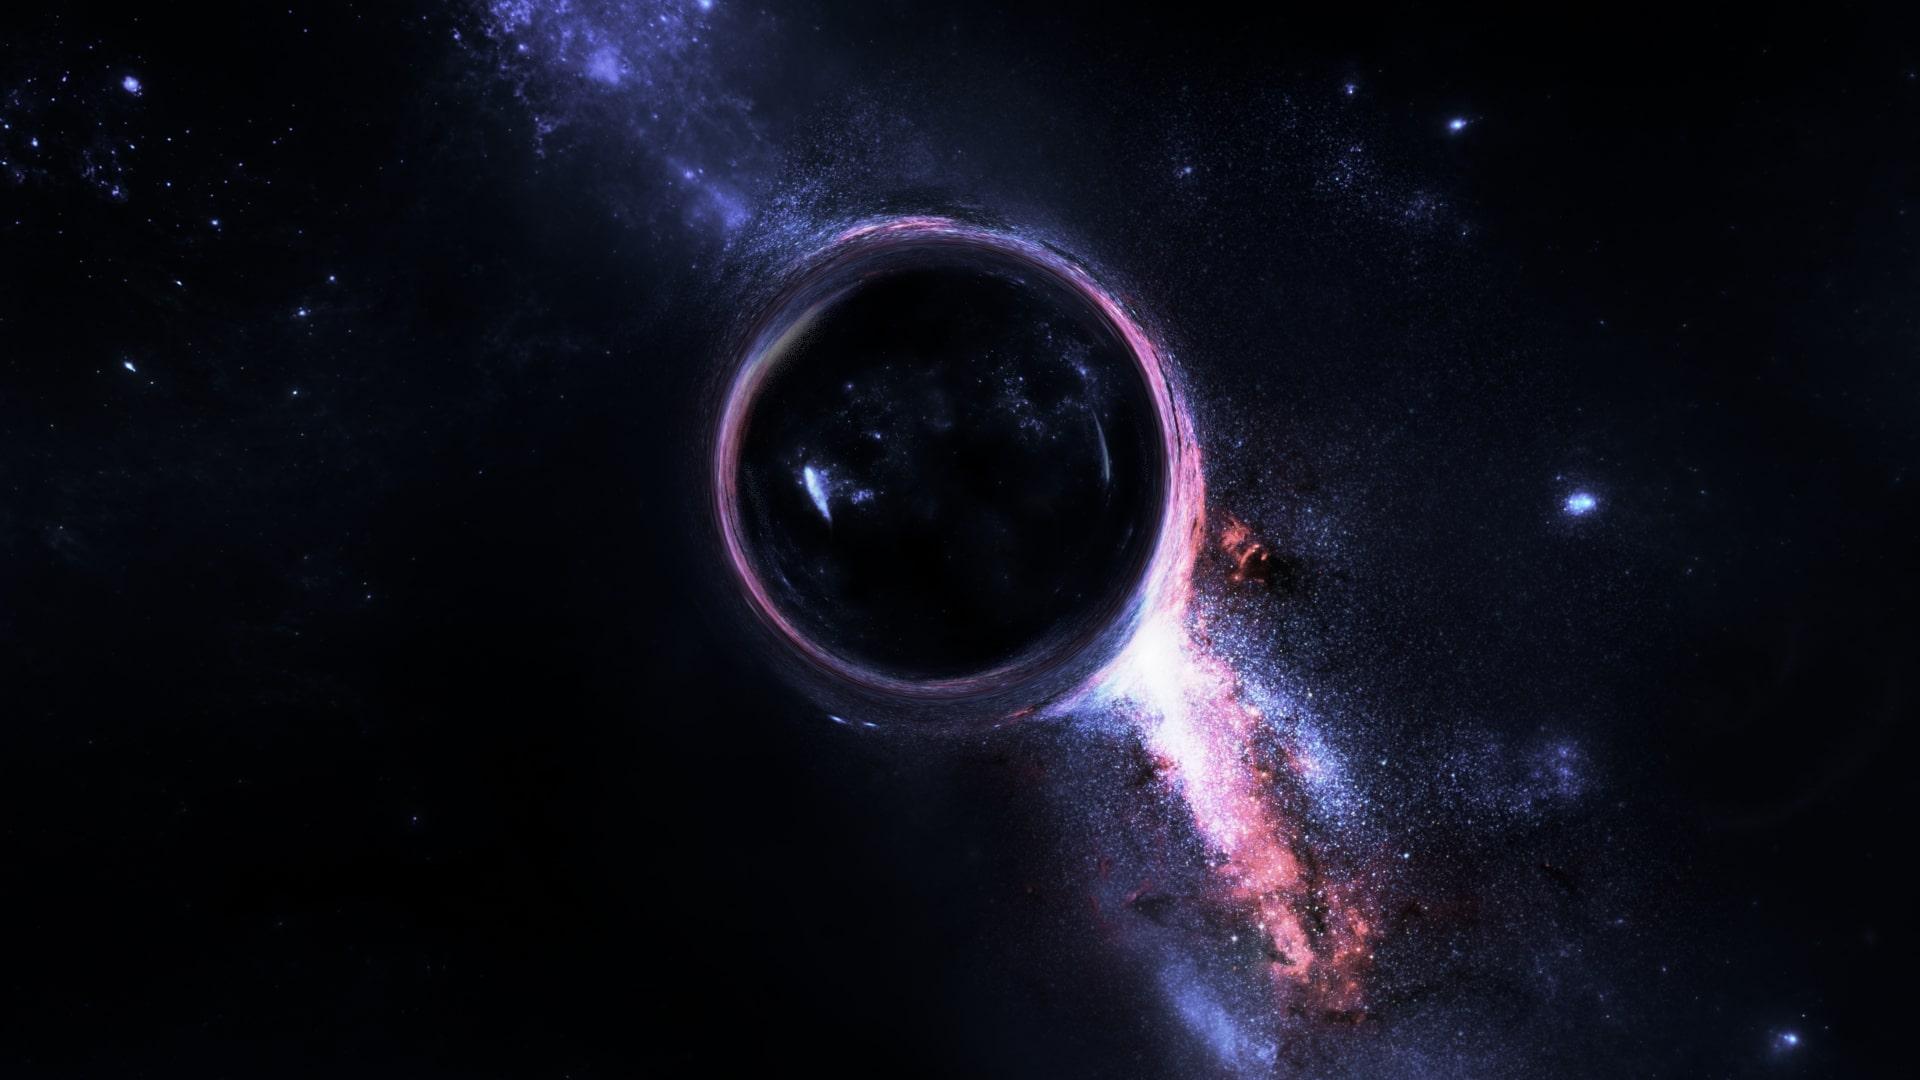 Wallpaper of Black Hole, Space, Galaxy background & HD image